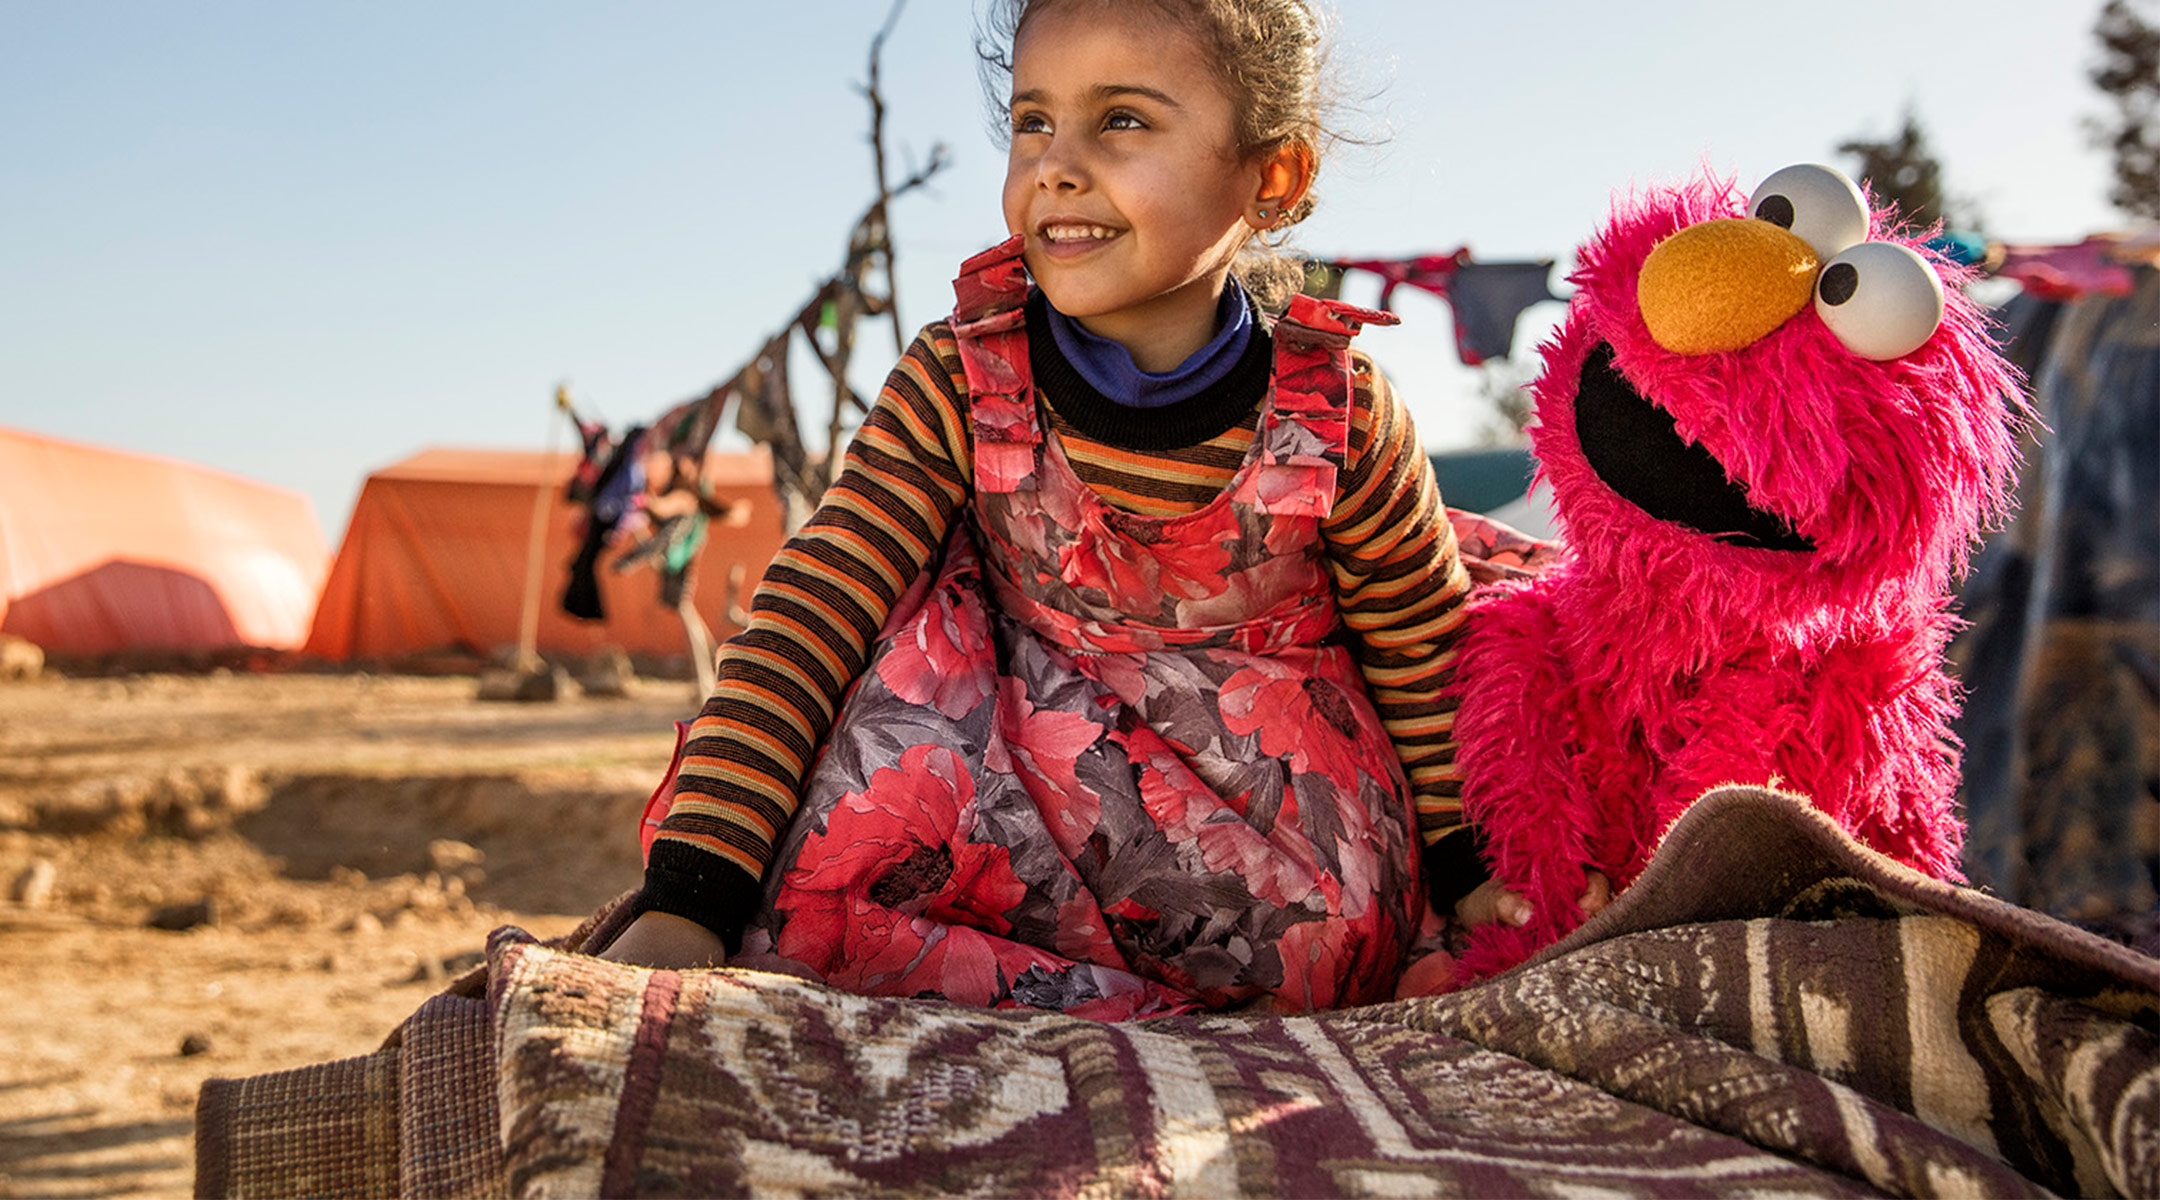 sesame street launches arabic language episodes aimed at refugee children 